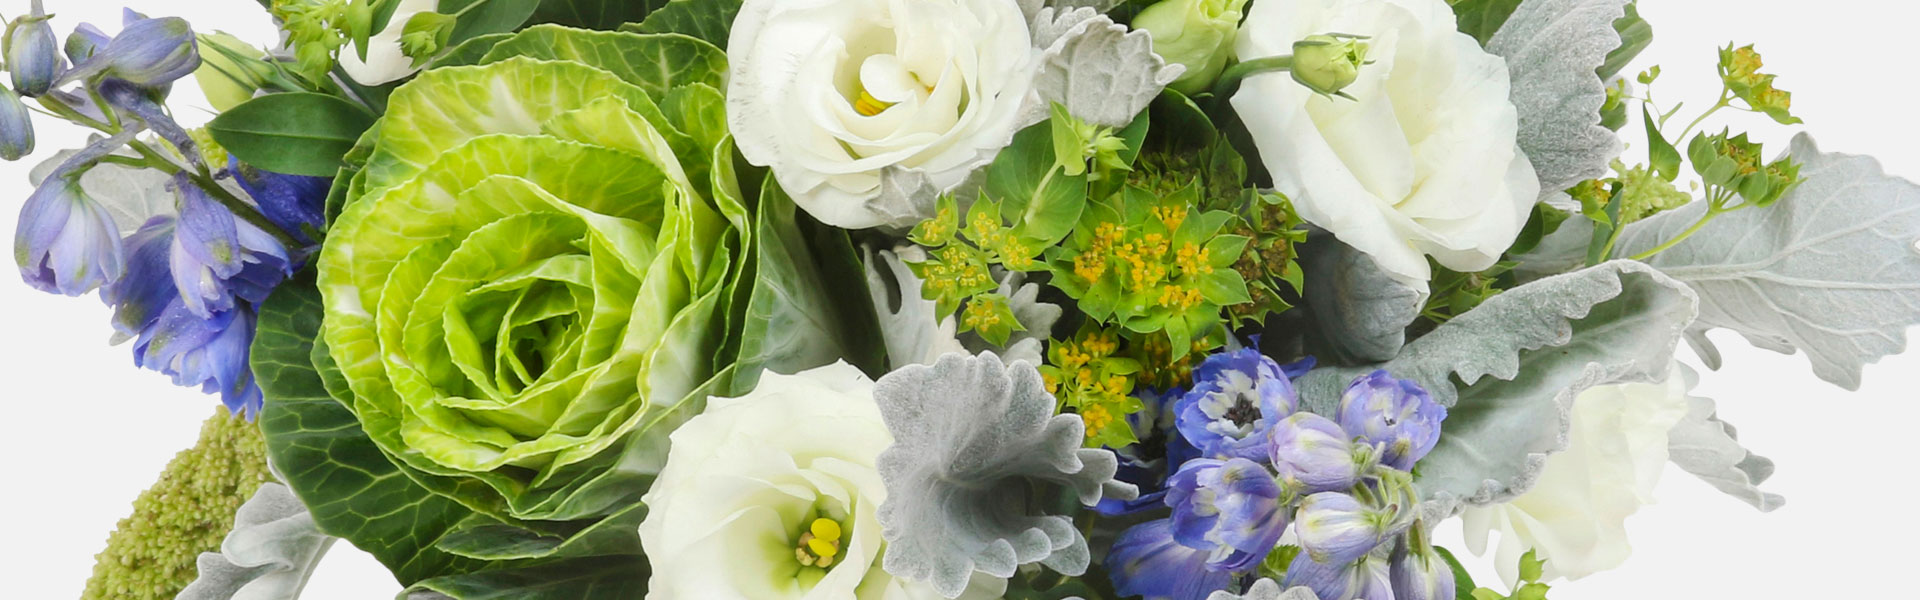 The Perfect Passover Flowers for Your Seder Table